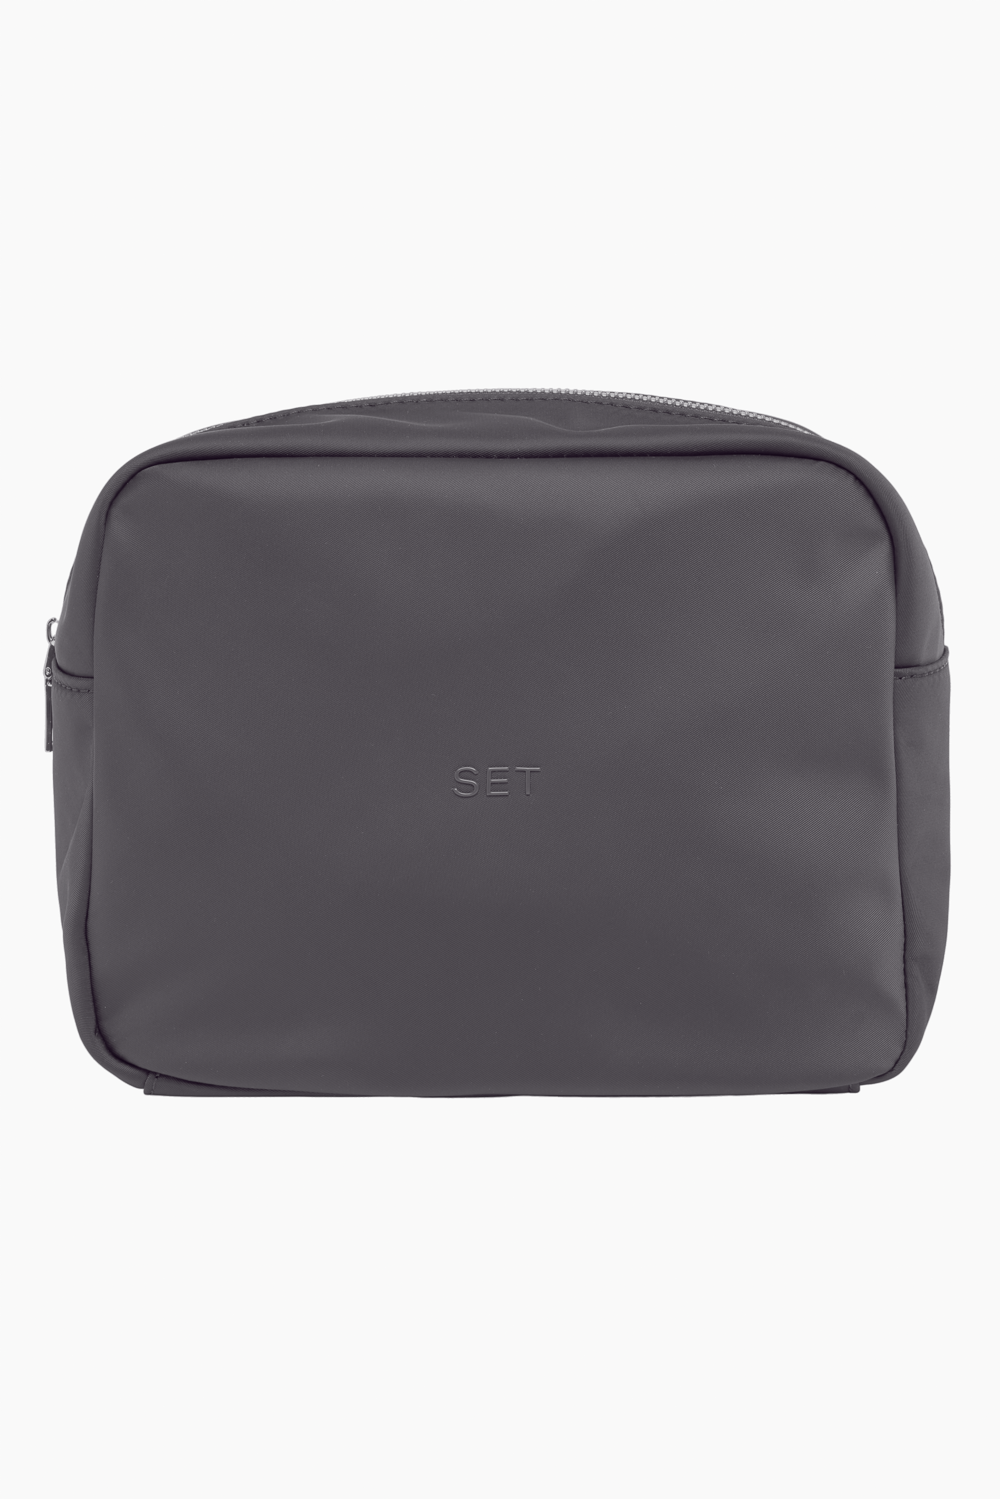 SET™ EVERYTHING BAG IN GRAPHITE